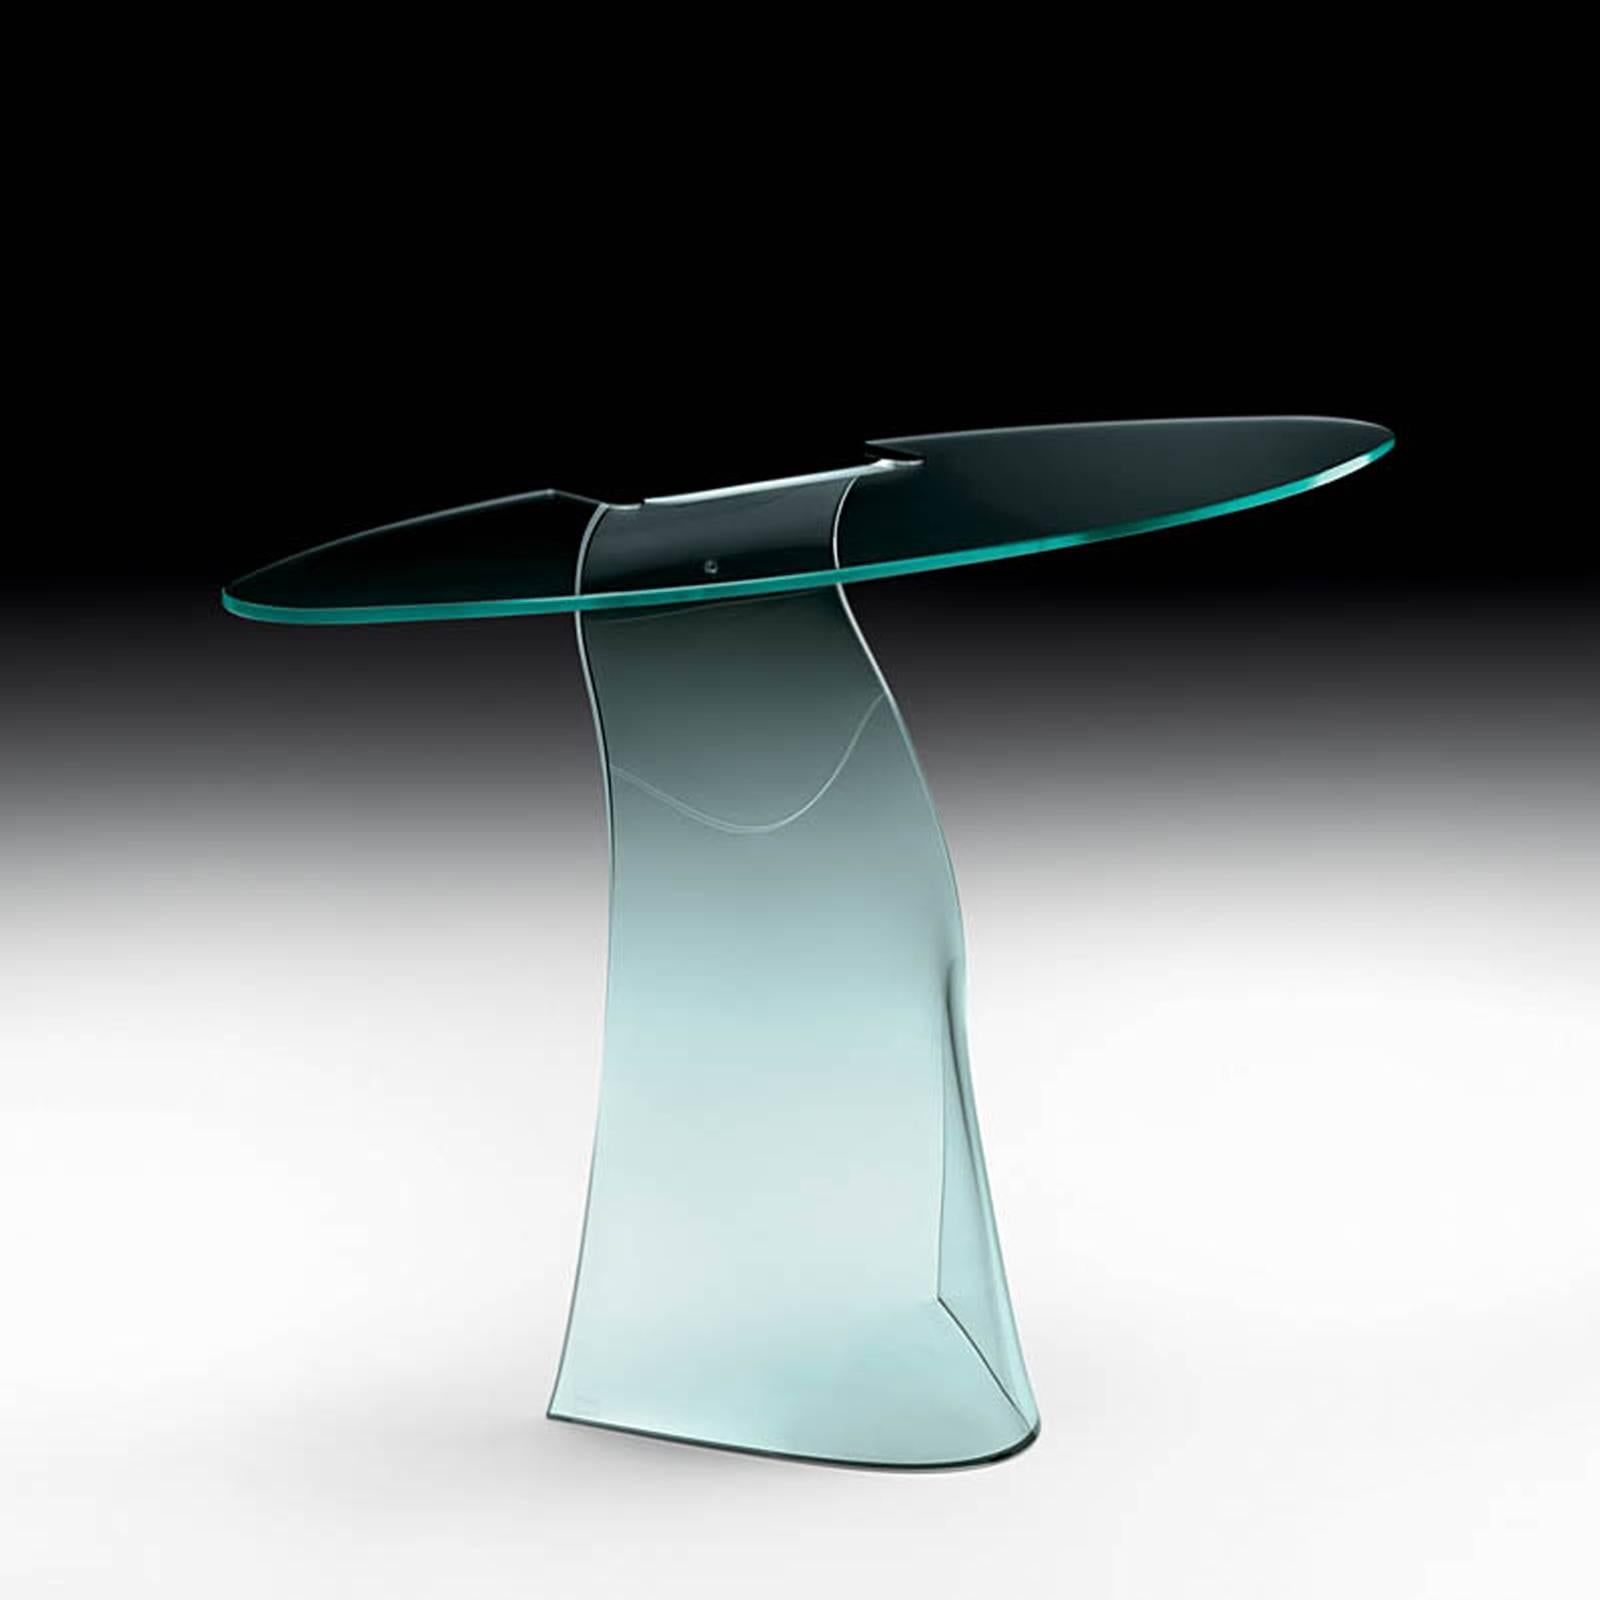 Console Charme casted in one slab of curved 
clear glass  in 12 mm thickness. Subtle designed piece.
